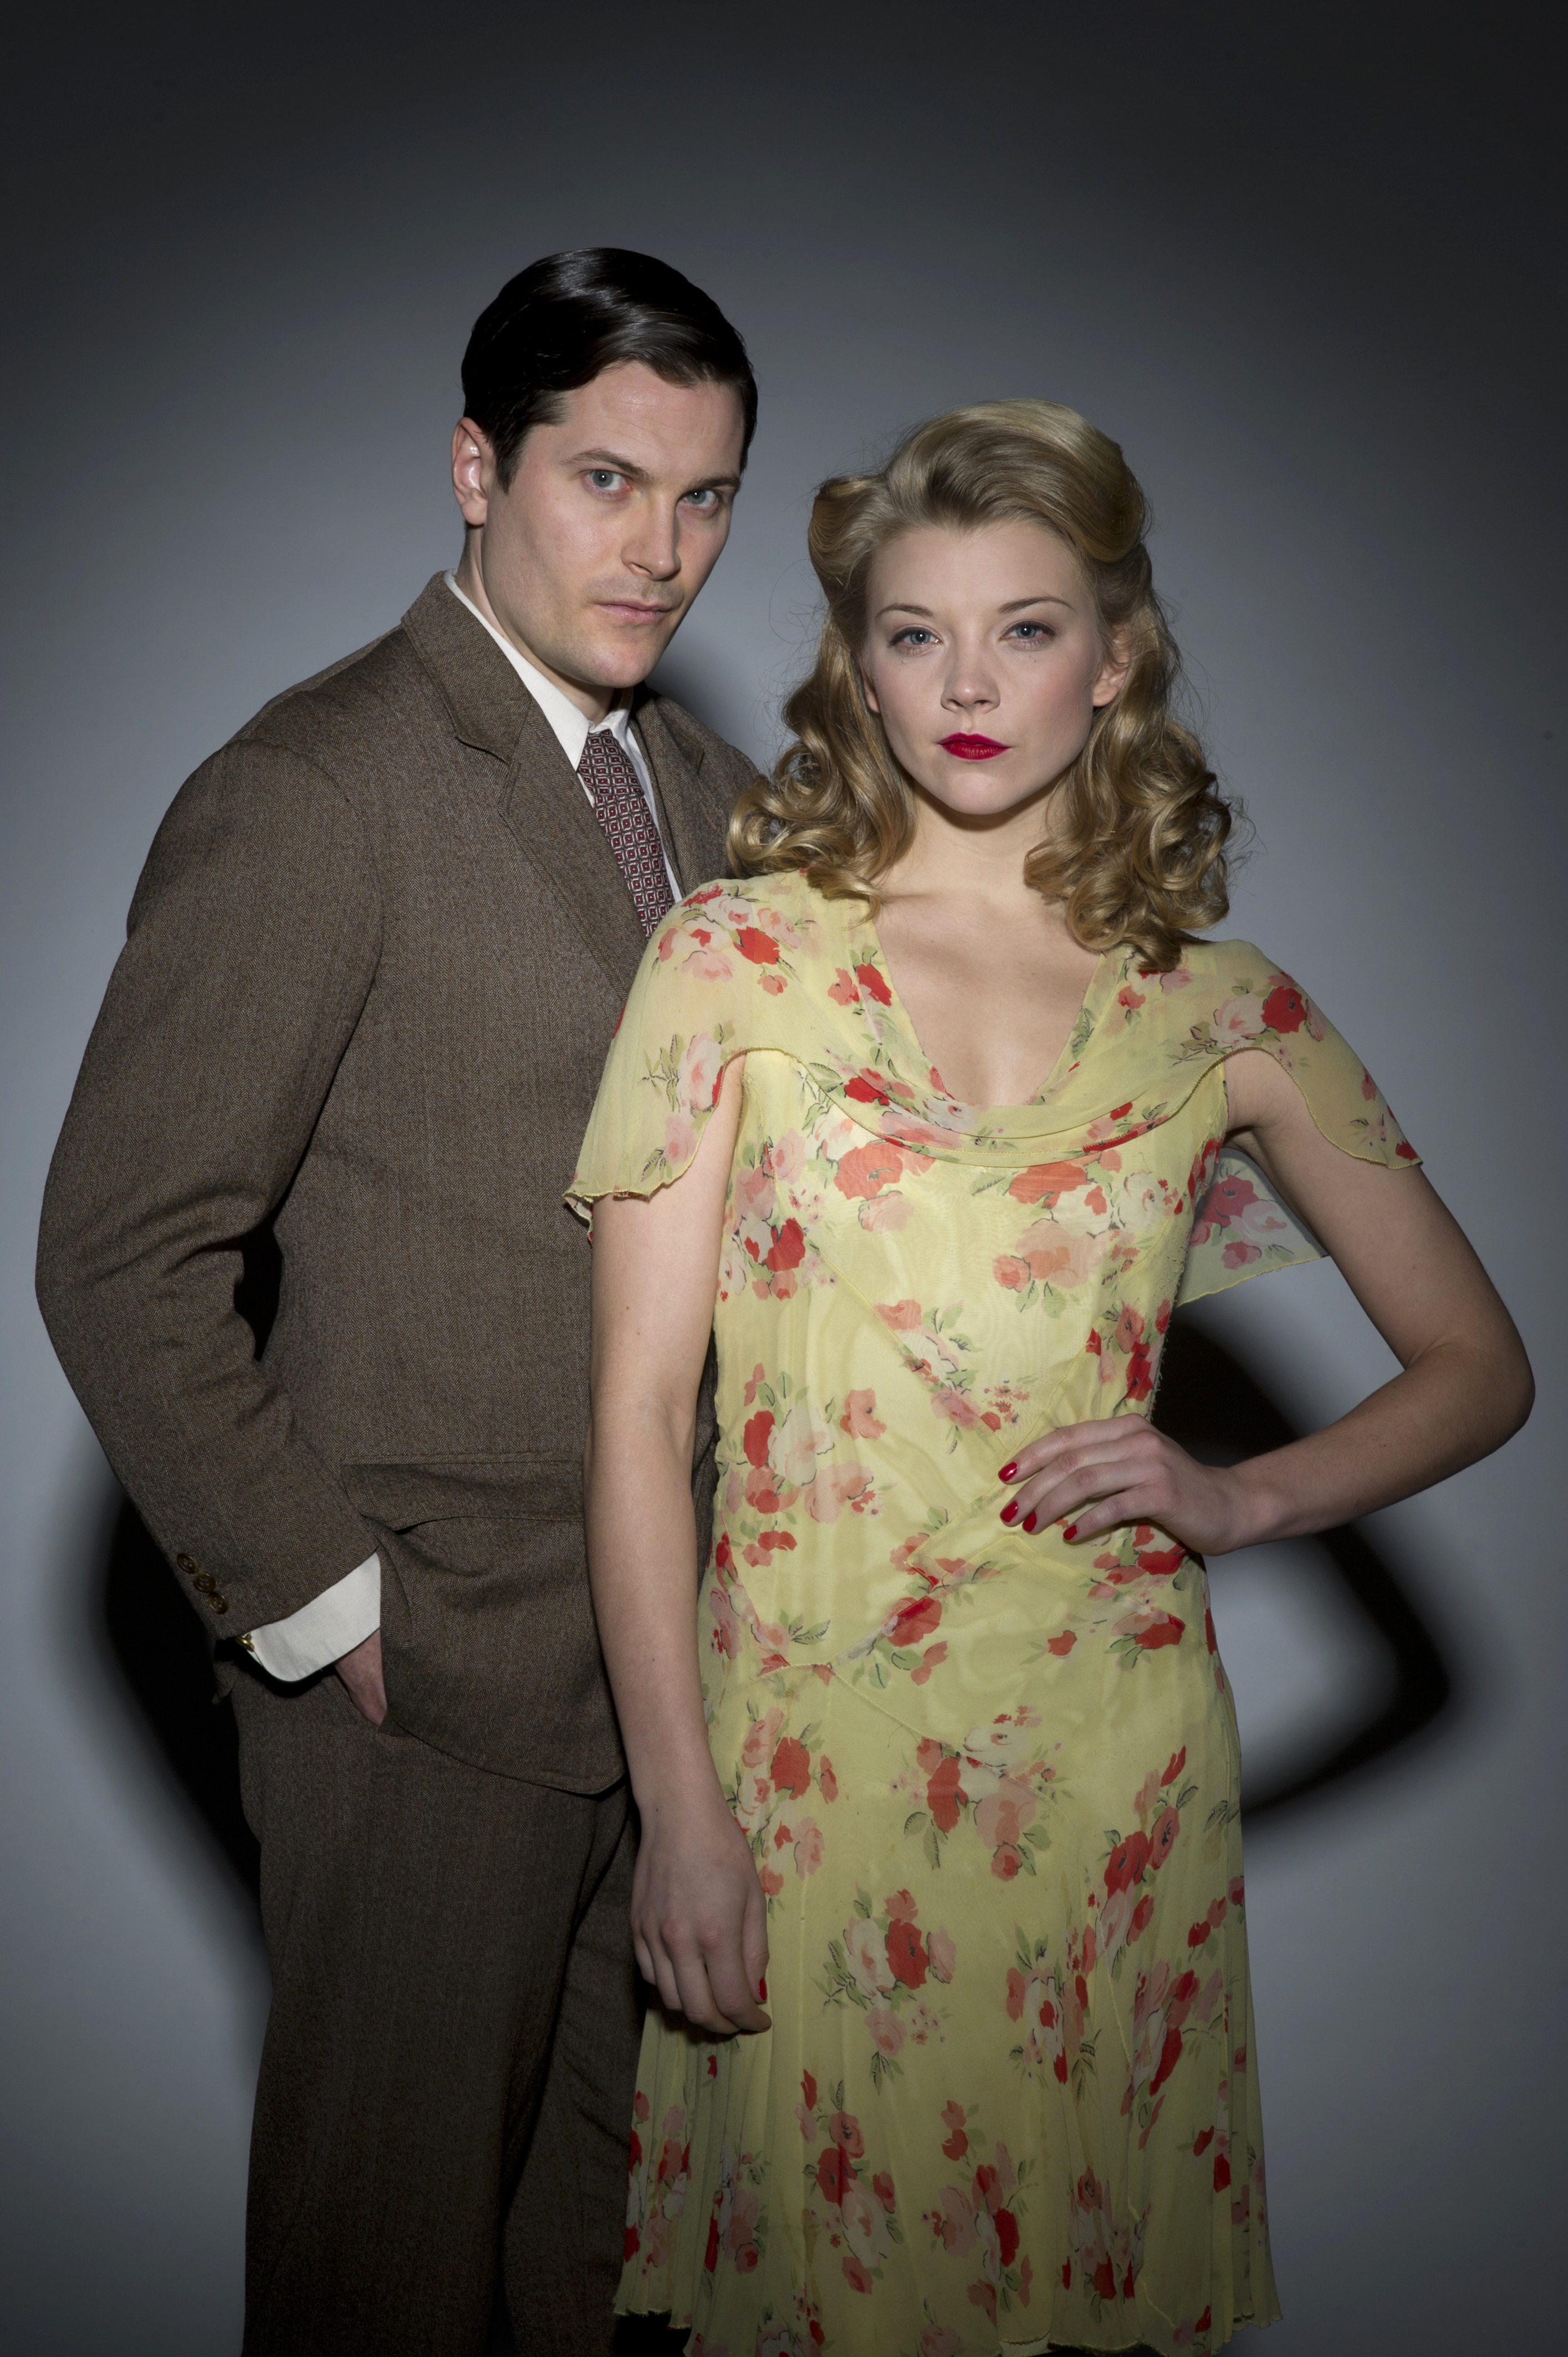 Kieran Bew, Natalie Dormer in After Miss Julie at The Young Vic Theatre London.